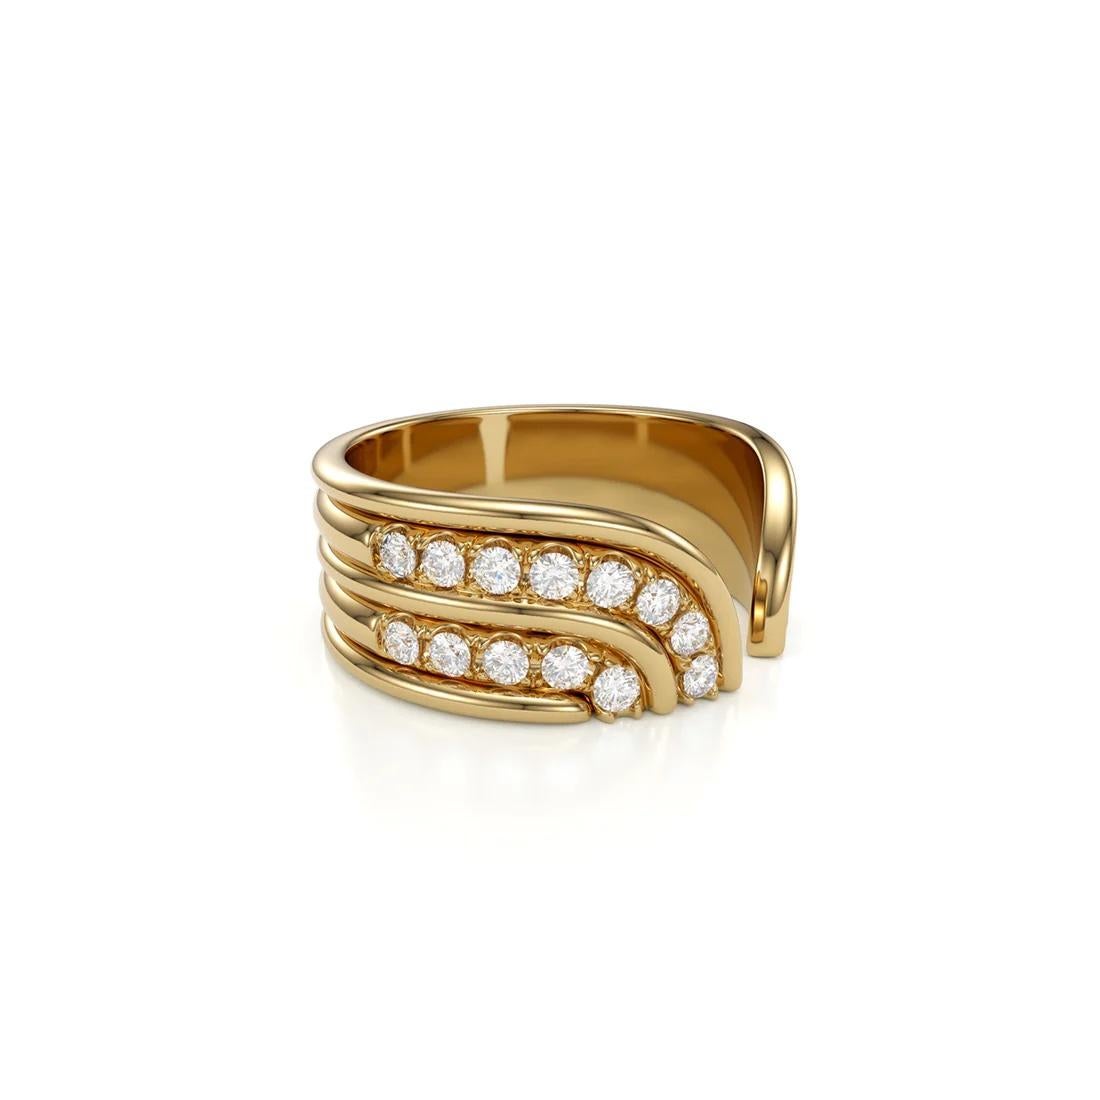 This modern yet minimal ring exudes chic and elegance. Meticulously crafted, its crisp banded detail boasts alternating rows of pave diamonds that seamlessly curve and embrace the finger with a graceful flourish. This piece radiates an aura of